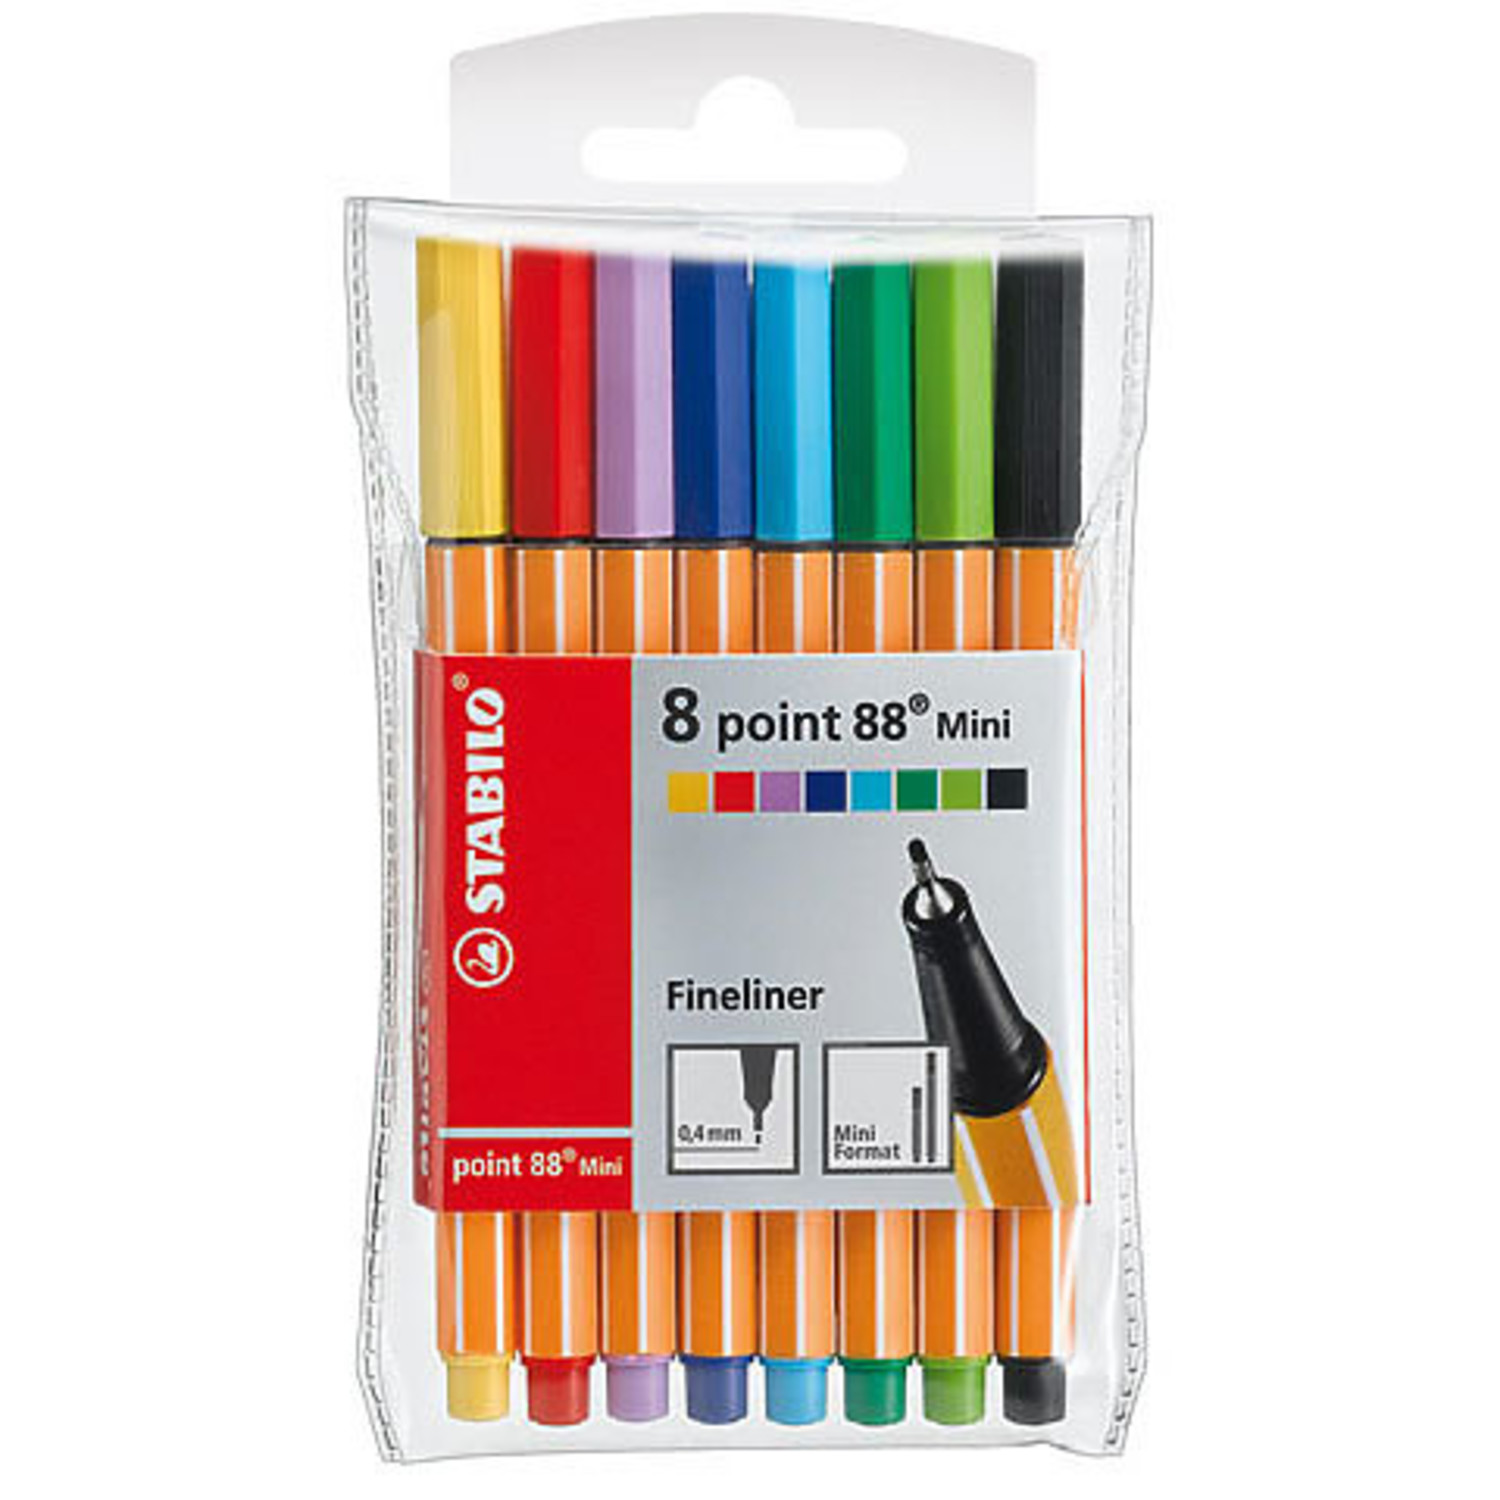 Stabilo Point 88 Fineliner Pens and Sets